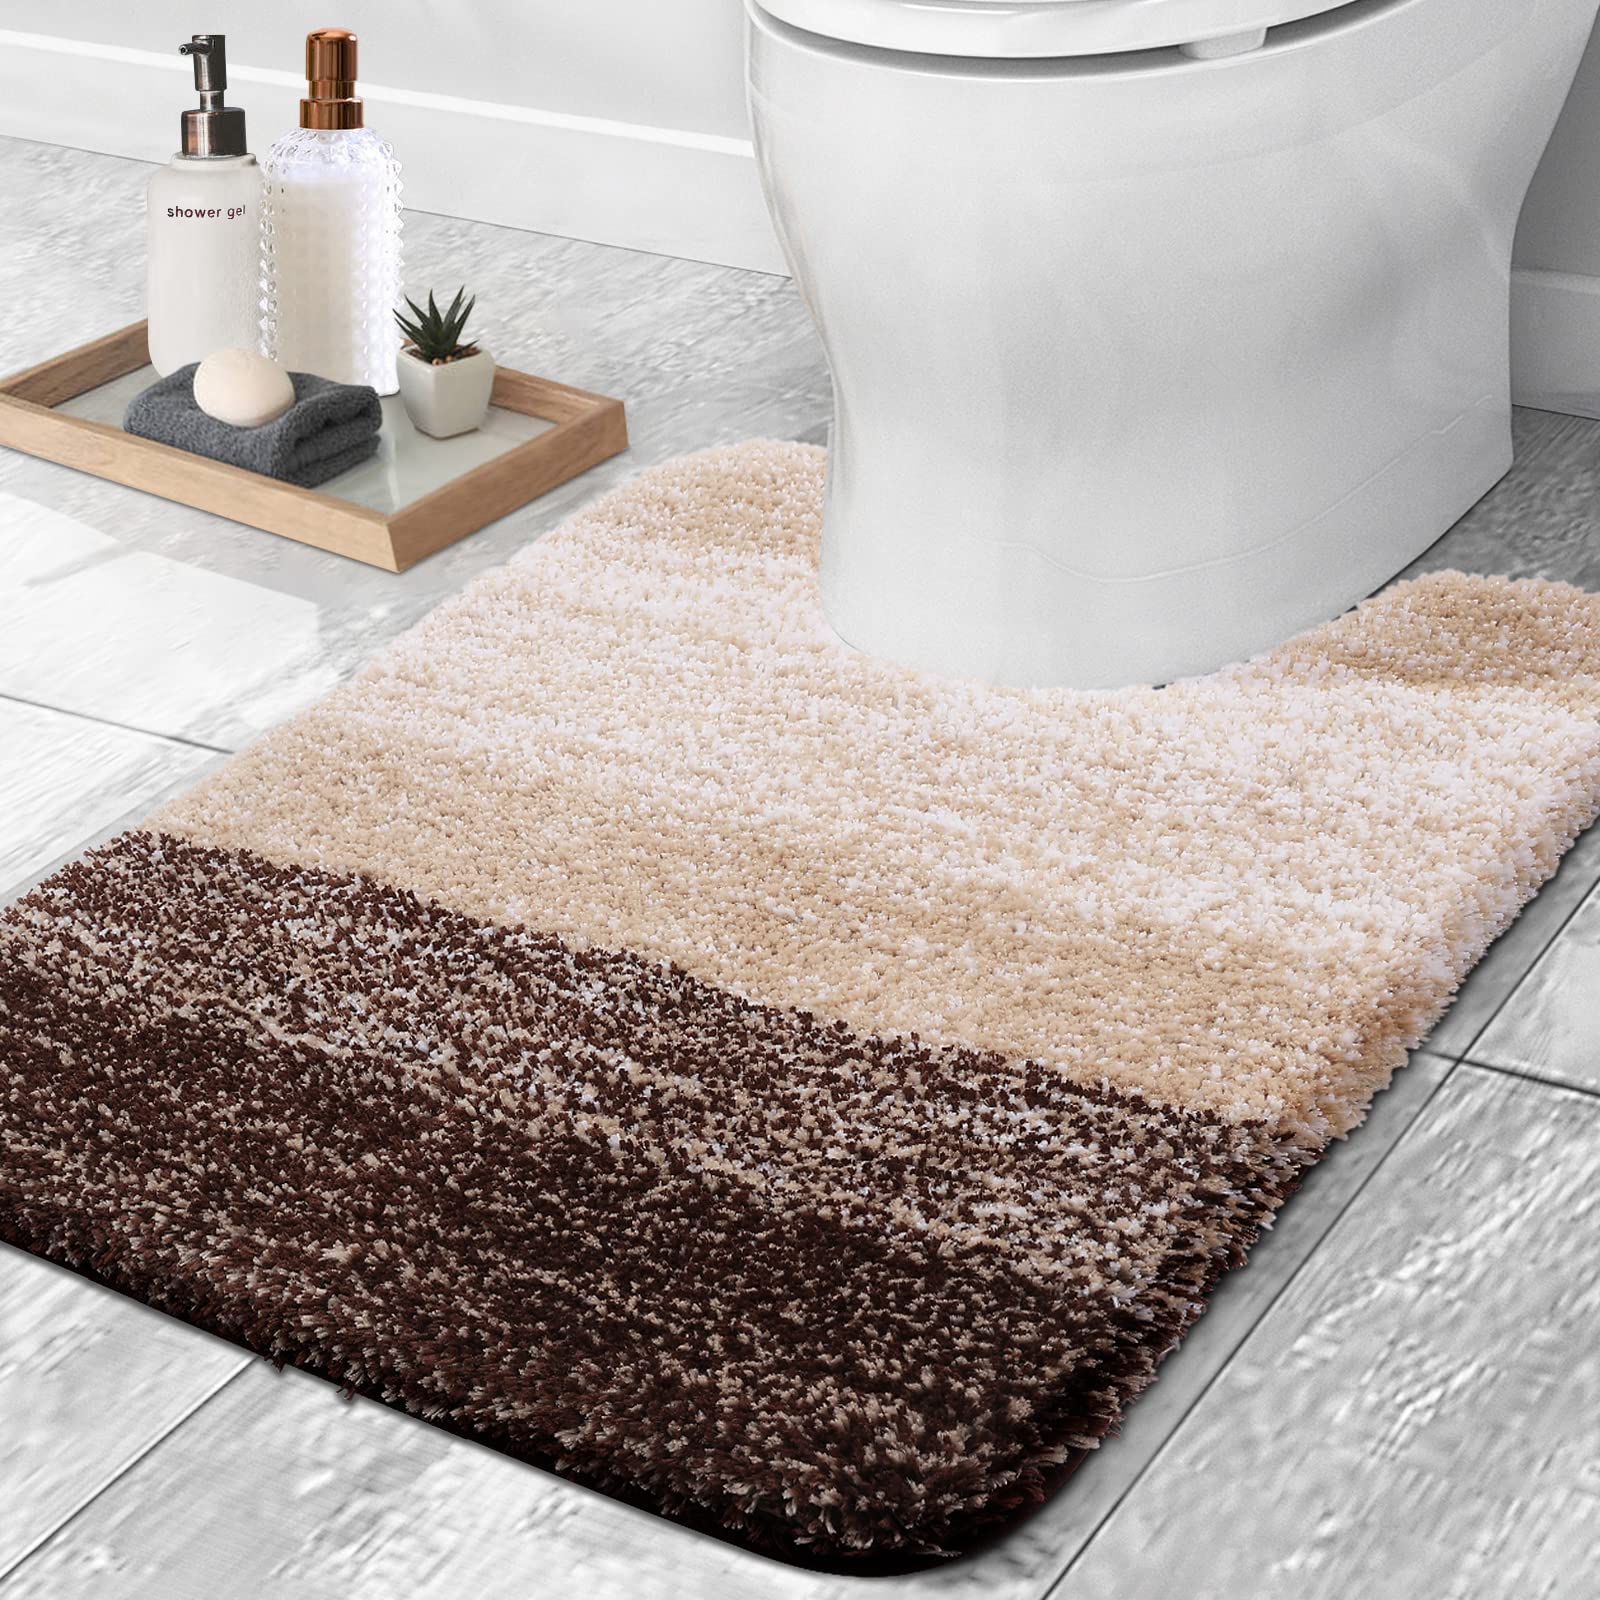 Buganda Luxury U-Shaped Bathroom Rugs, Super Soft and Absorbent Microfiber Toilet Bath Mats, Non-Slip Contour Bathroom Carpets with Rubber Backing, 20X24, Brown - image 1 of 7